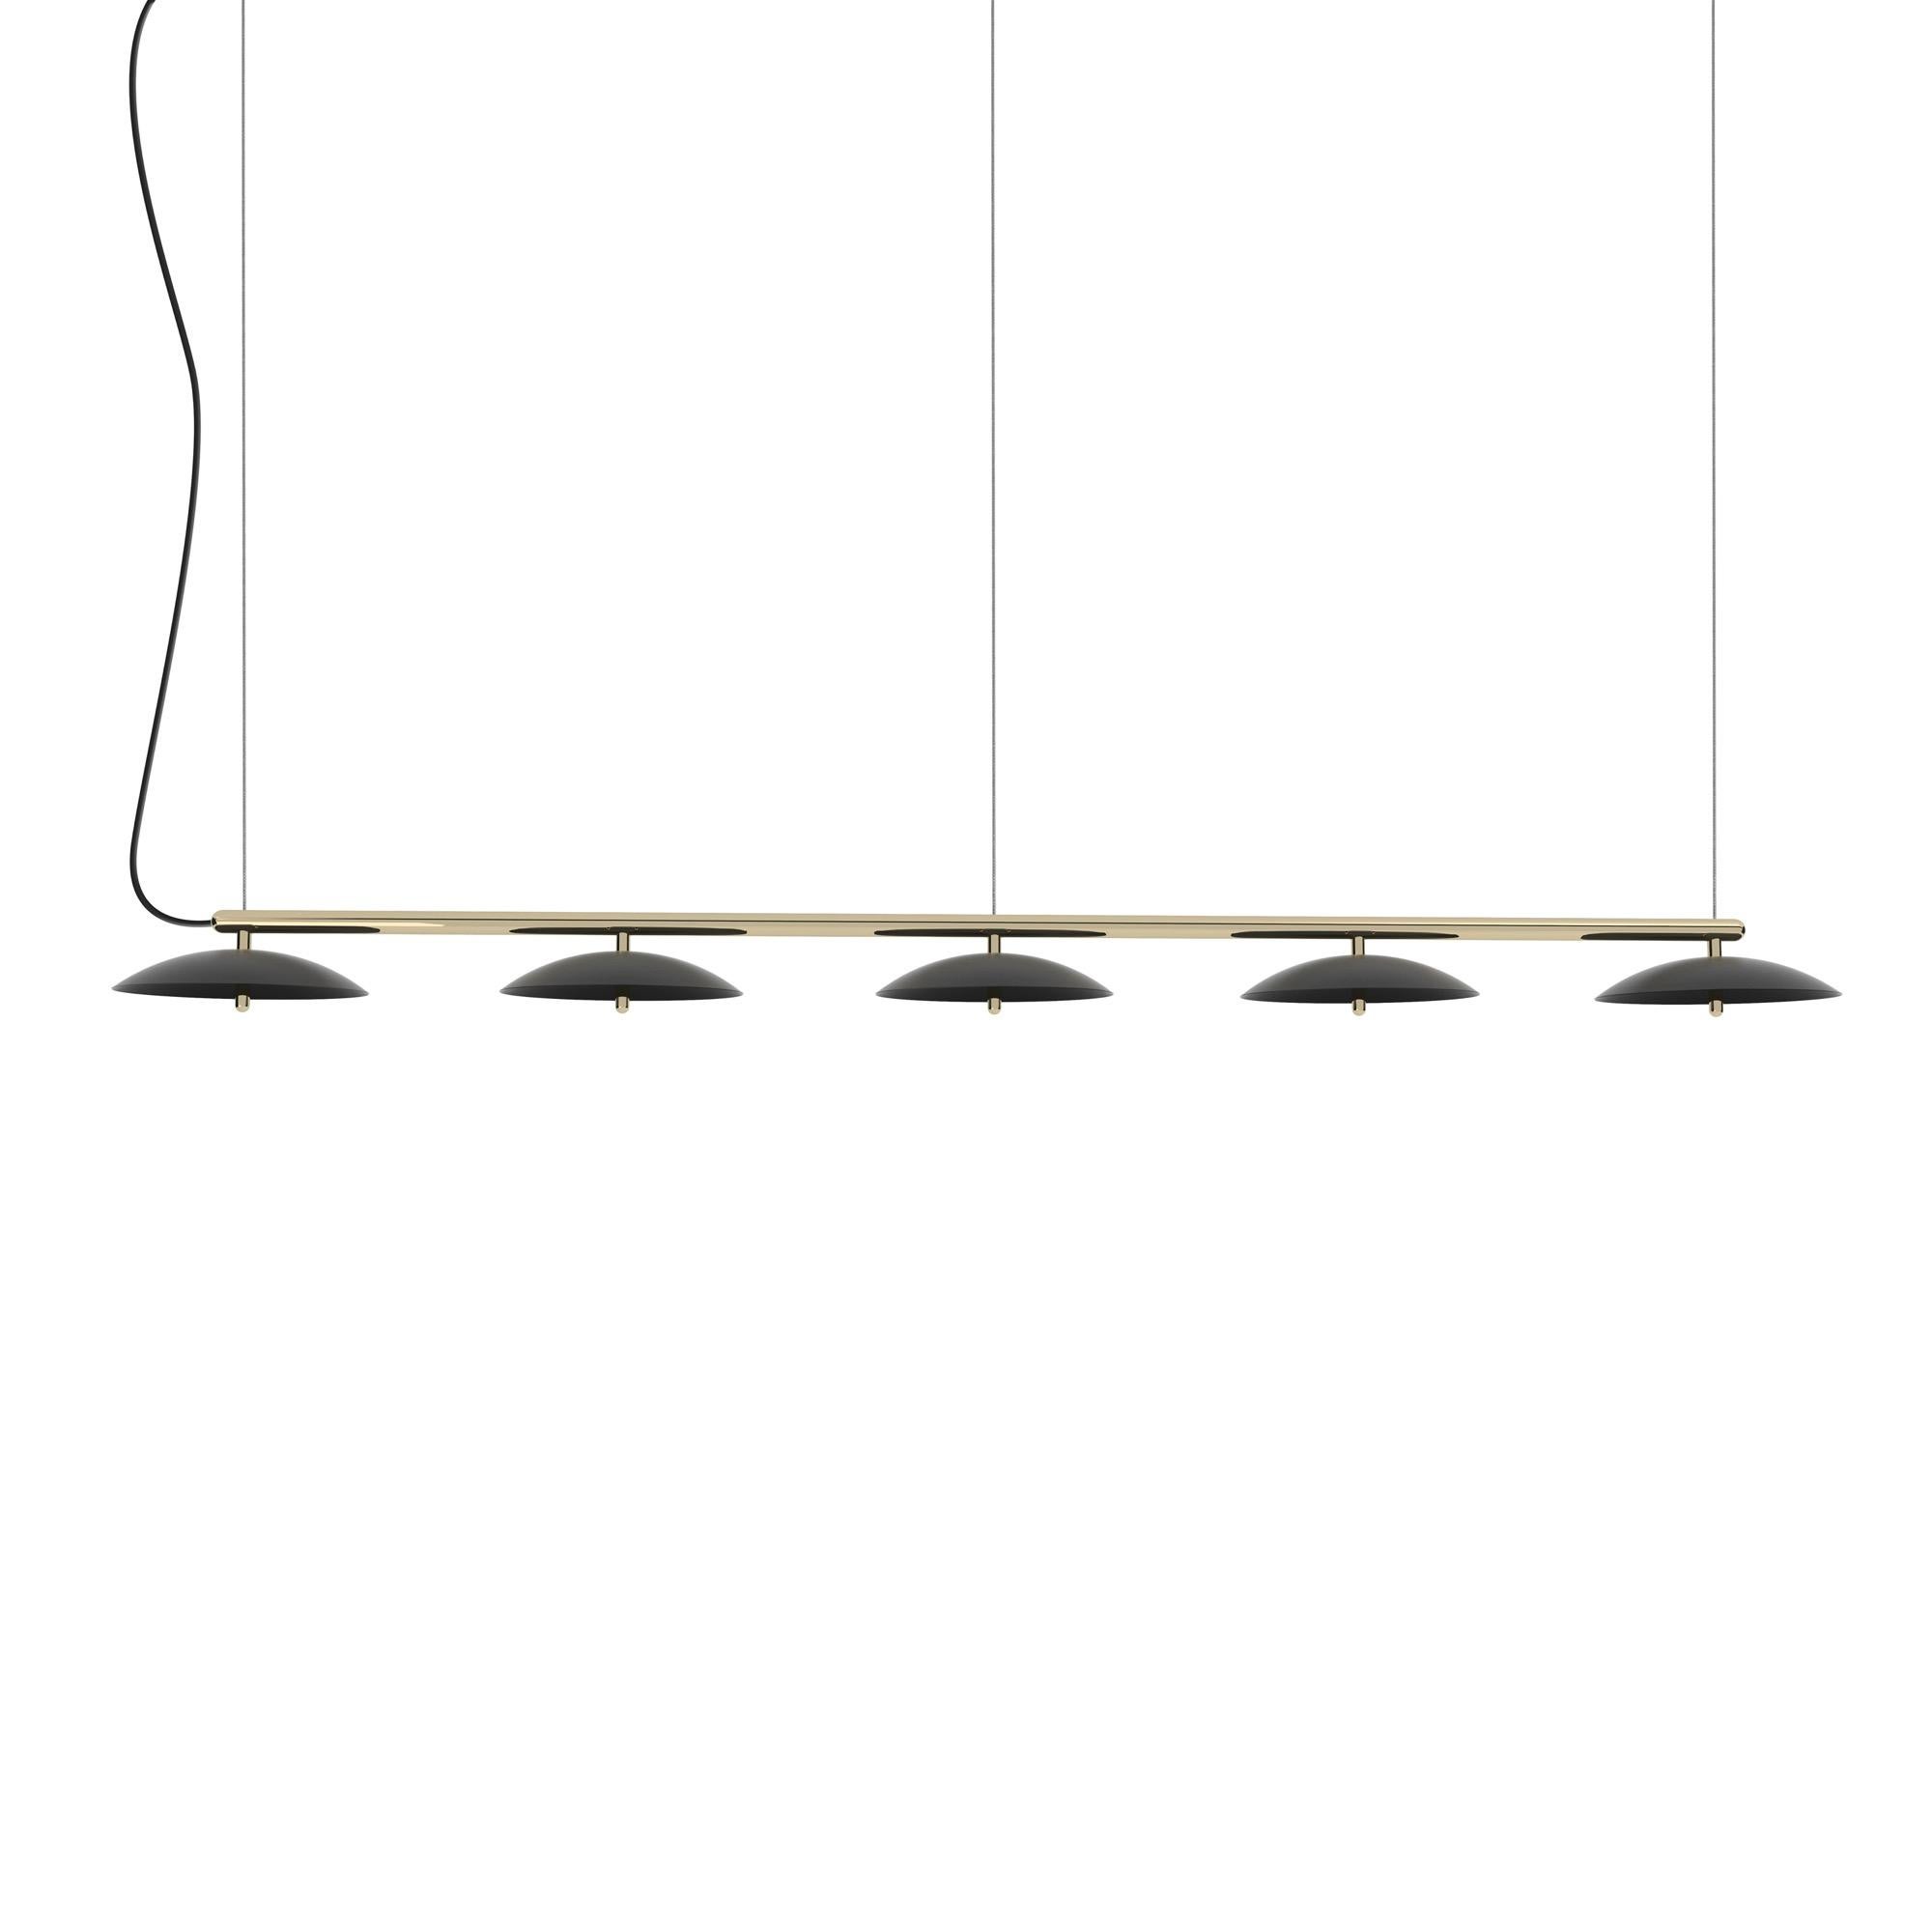 Perfect above a dining table or a conference table, the signal linear pendant is a decidedly modern linear suspension light. A polished metal arm effortlessly supports spun metal shades that cast a downward glow through perforated diffusers.